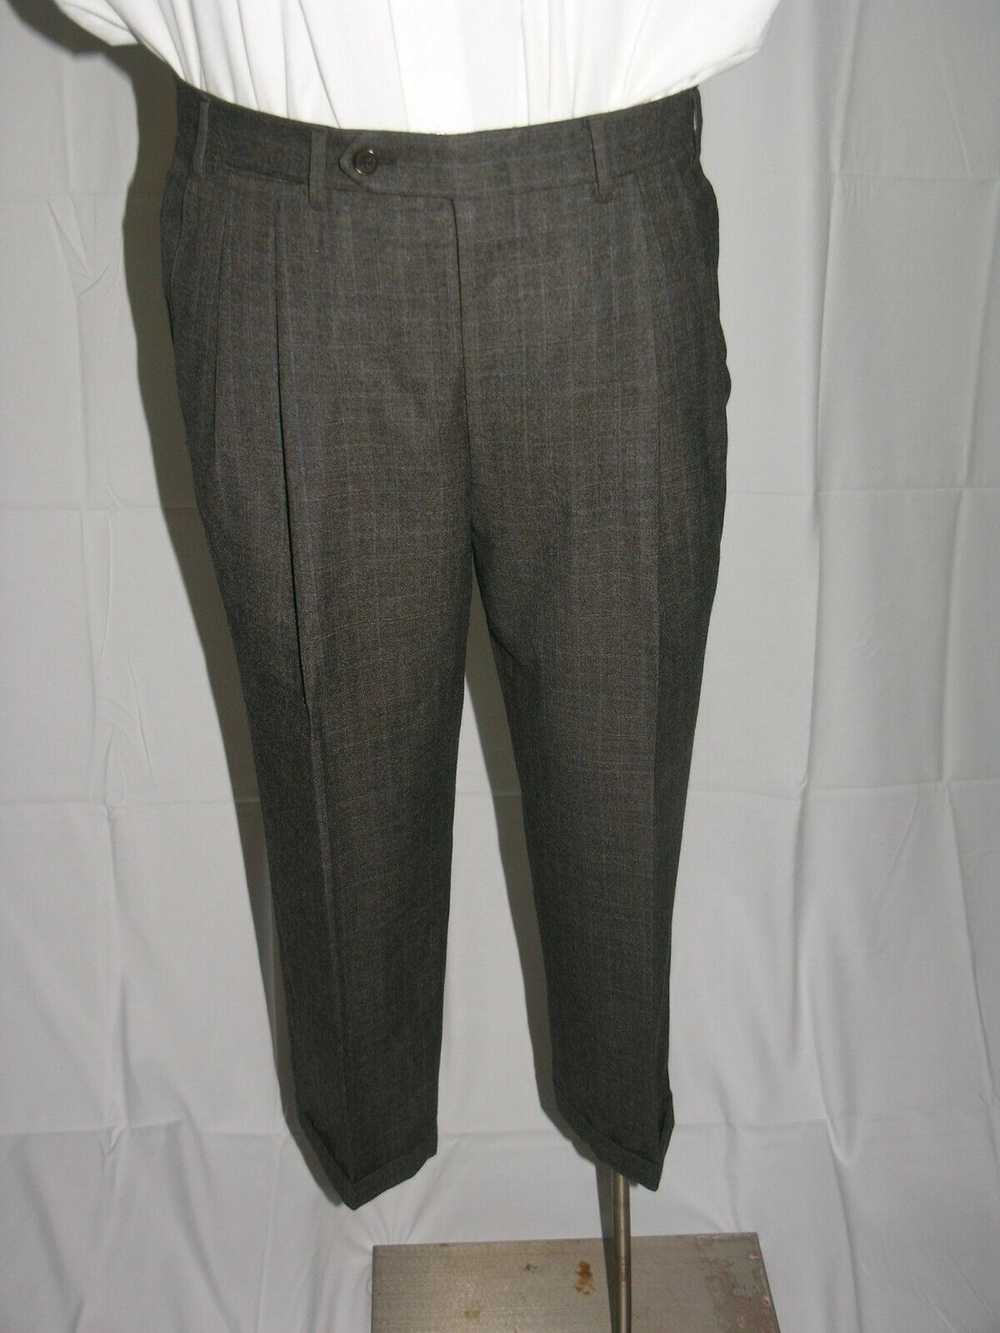 Canali Three Roll Two Super 130 Suit 38S - image 10